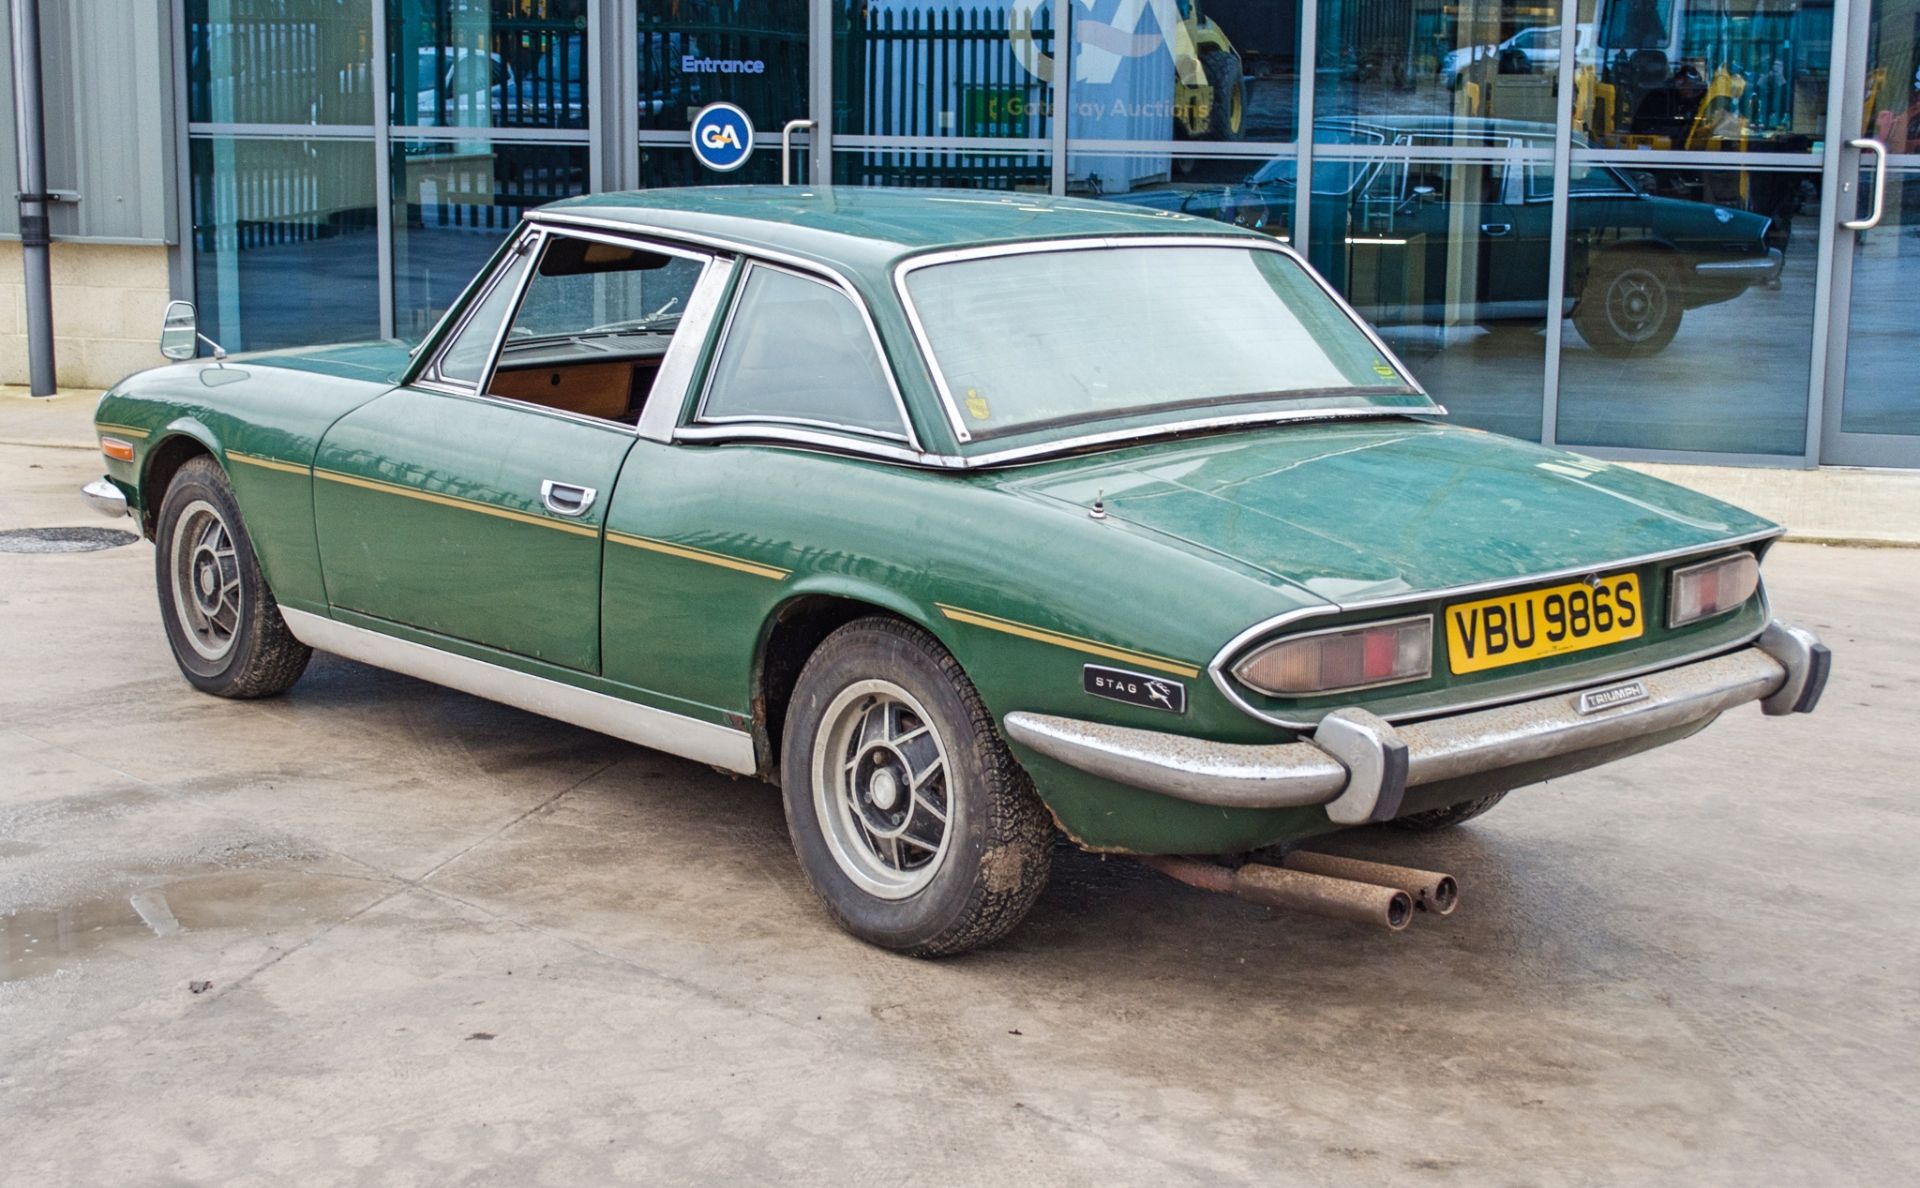 1978 Triumph Stag 3 litre manual 2 door convertible Barn Find - Image 8 of 57